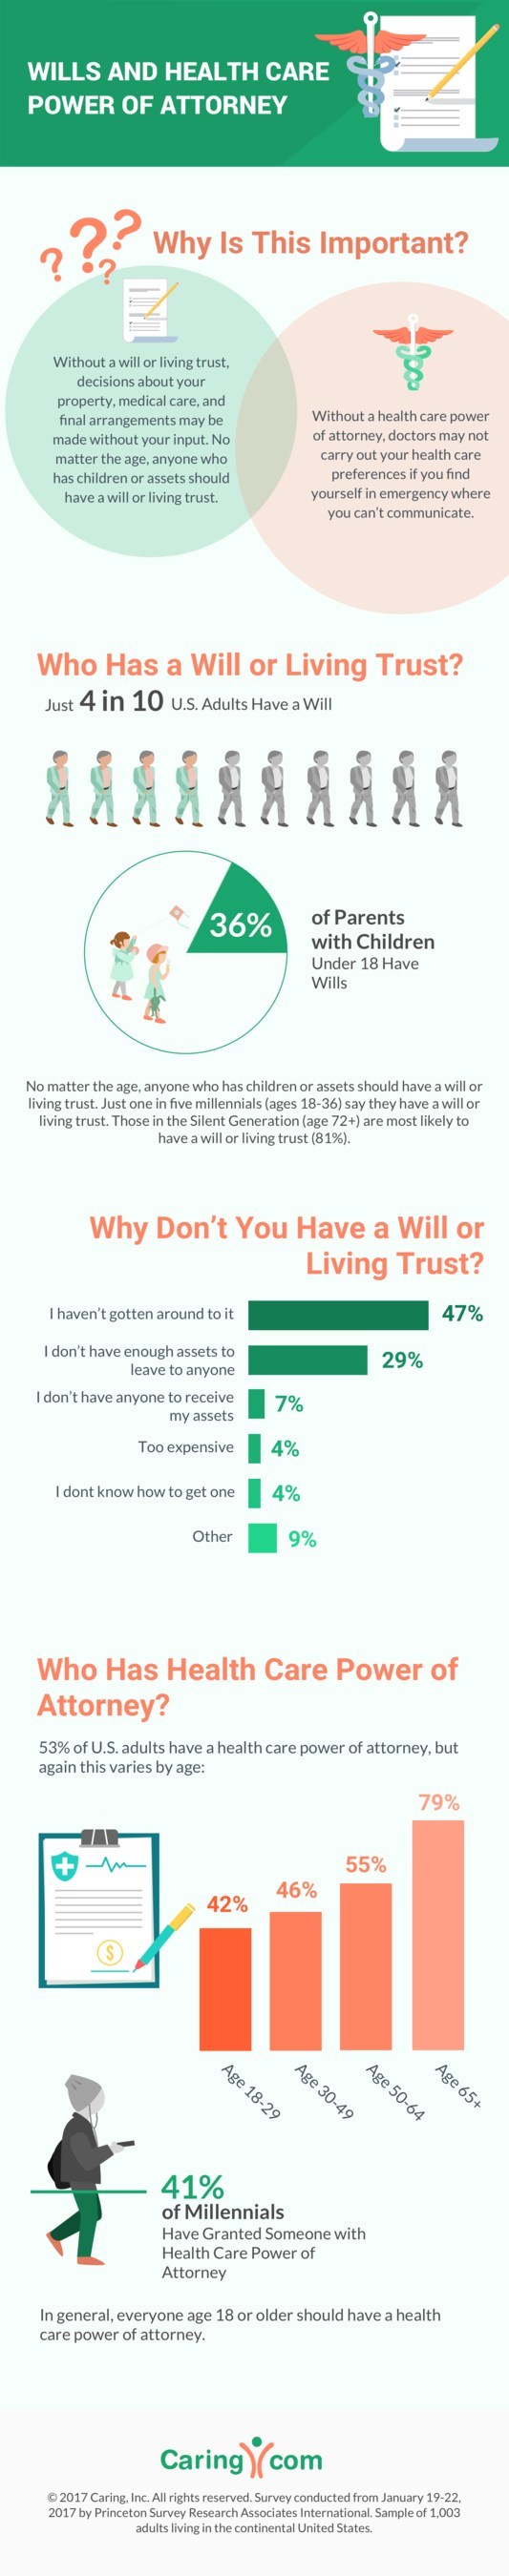 Nearly six in 10 U.S. adults don't have a will